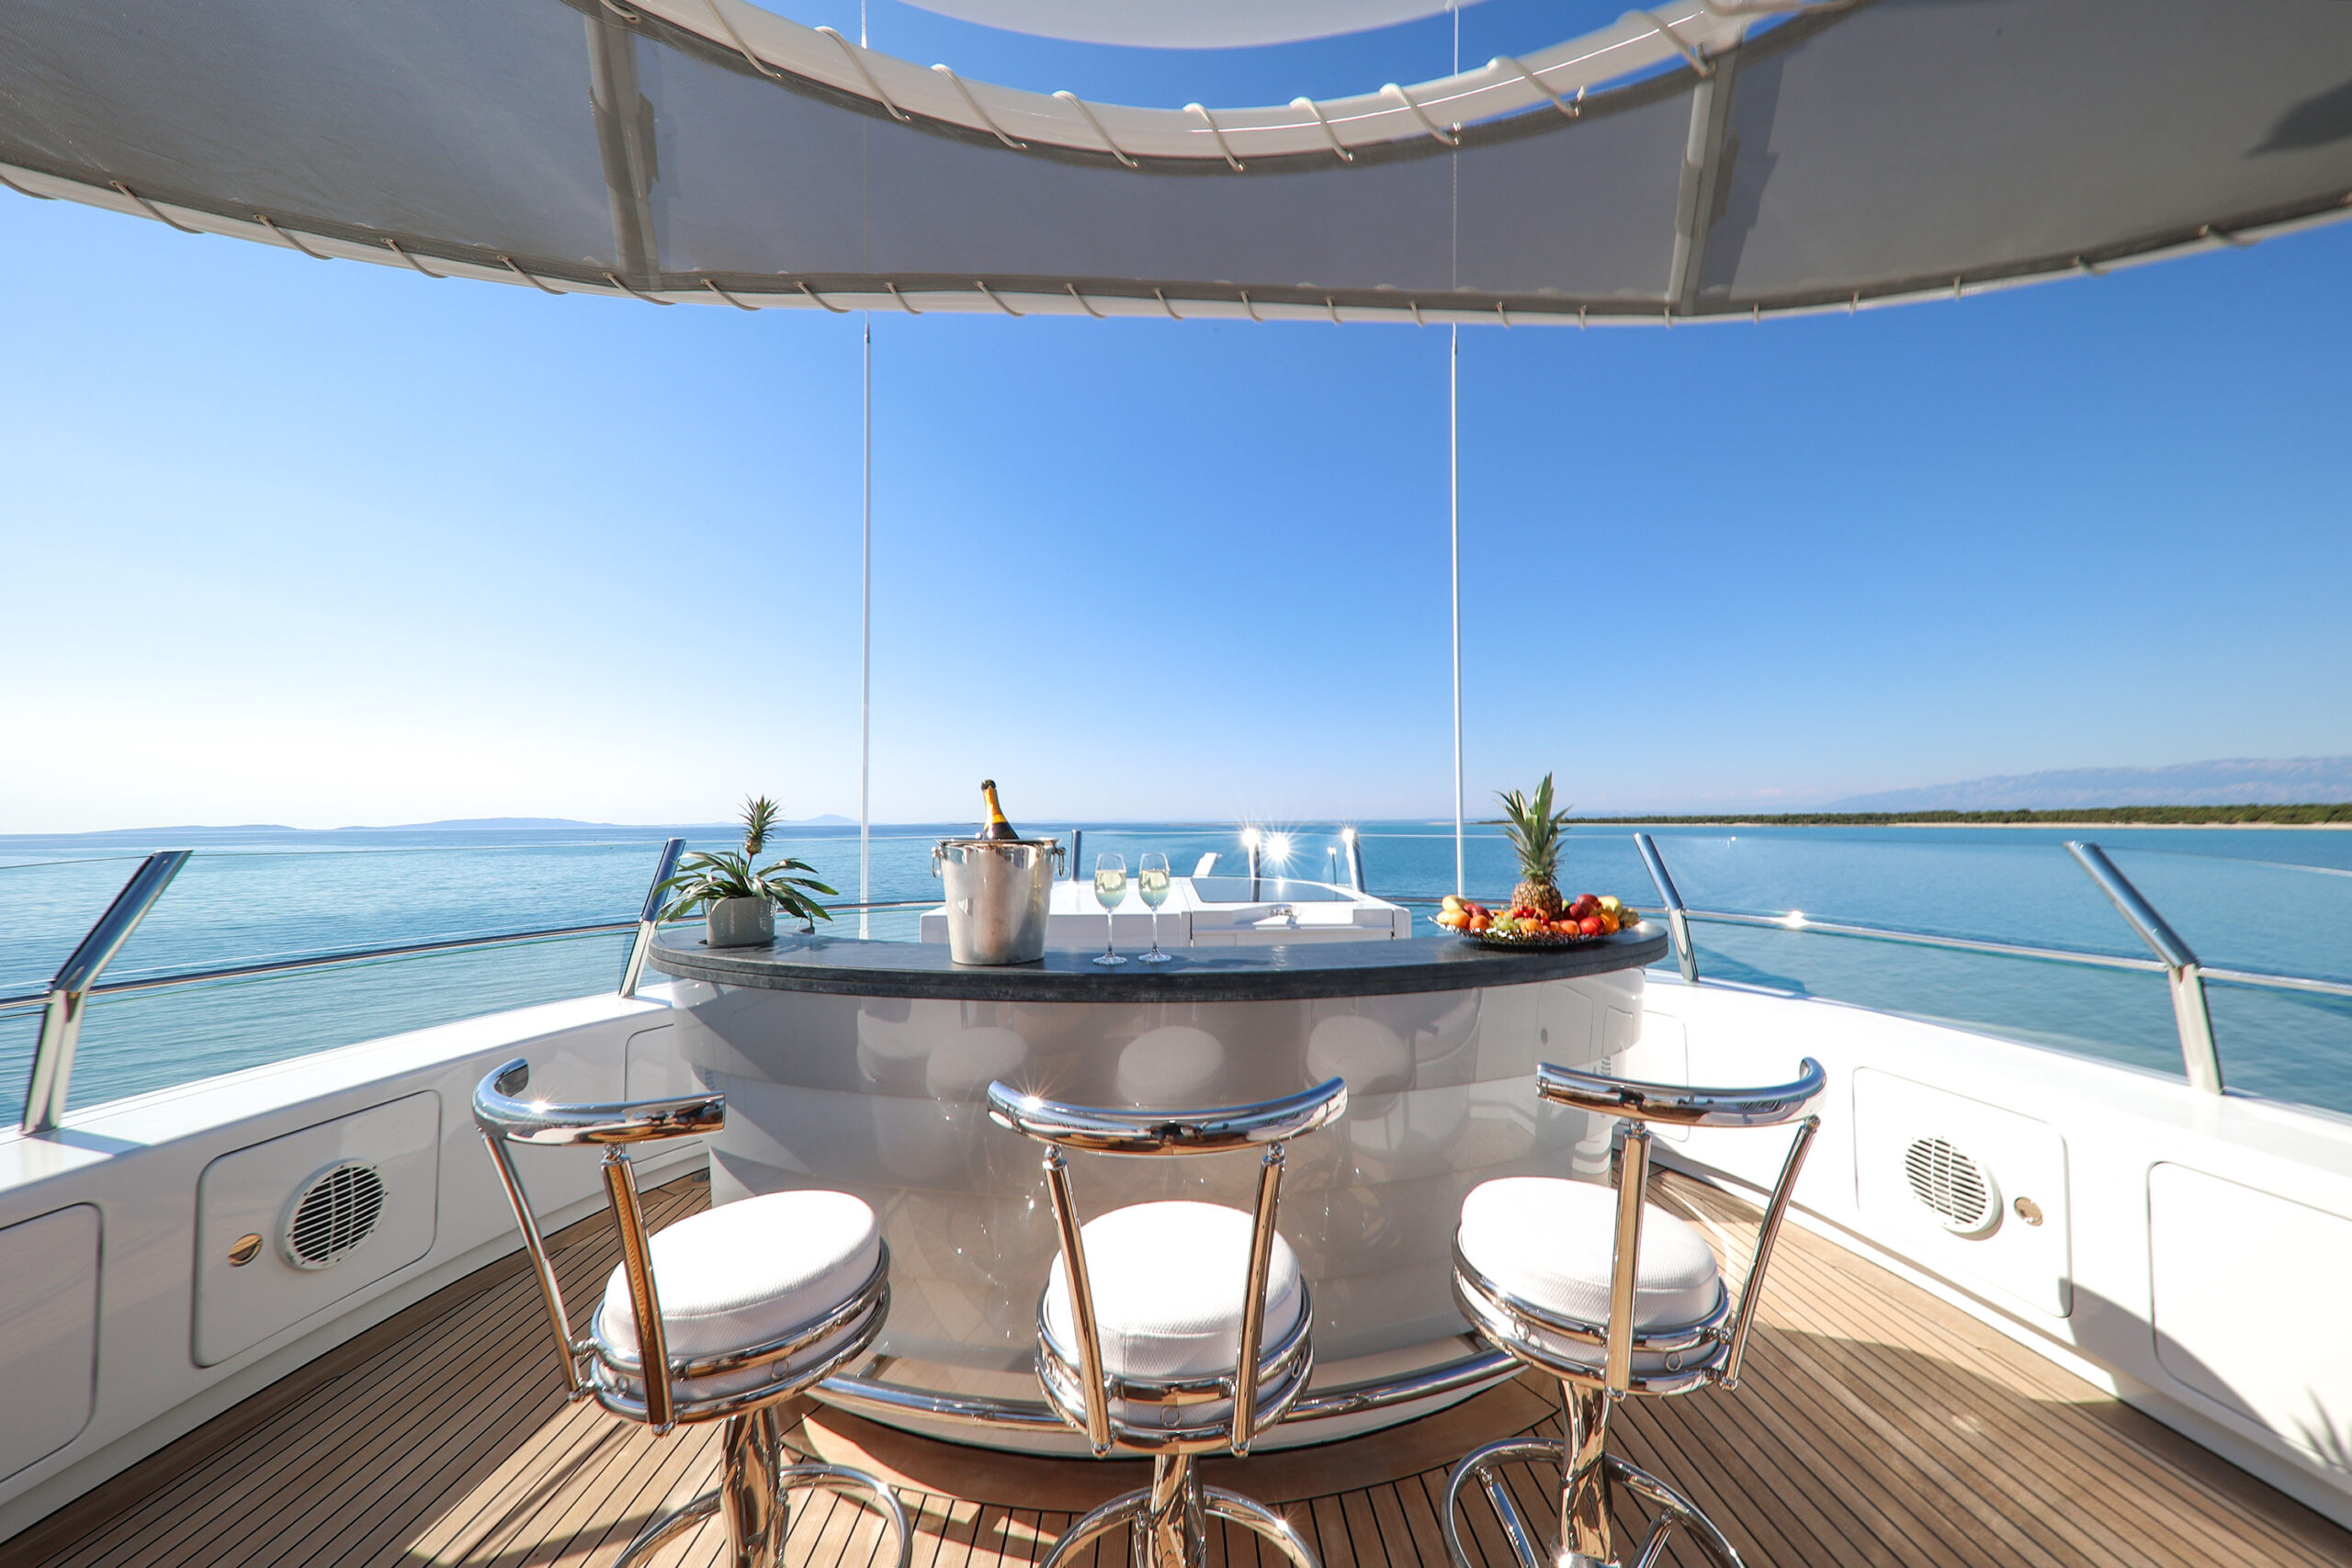 An incredible view of the Croatian Adriatic sea from a sundeck of a chartered yacht